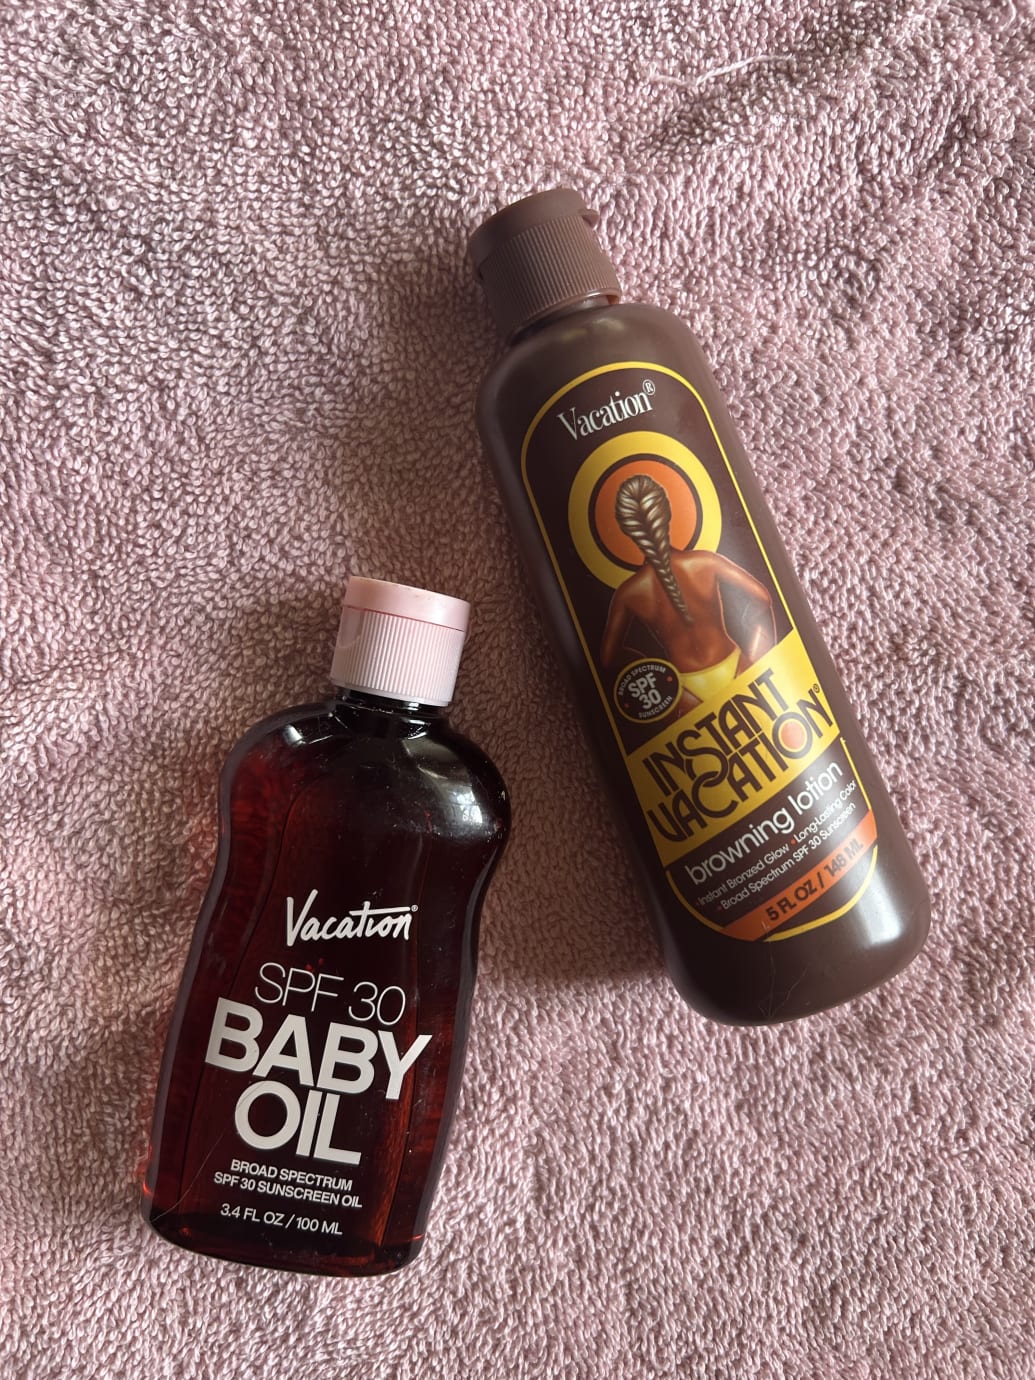 Vacation Instant Vacation Browning Lotion Review